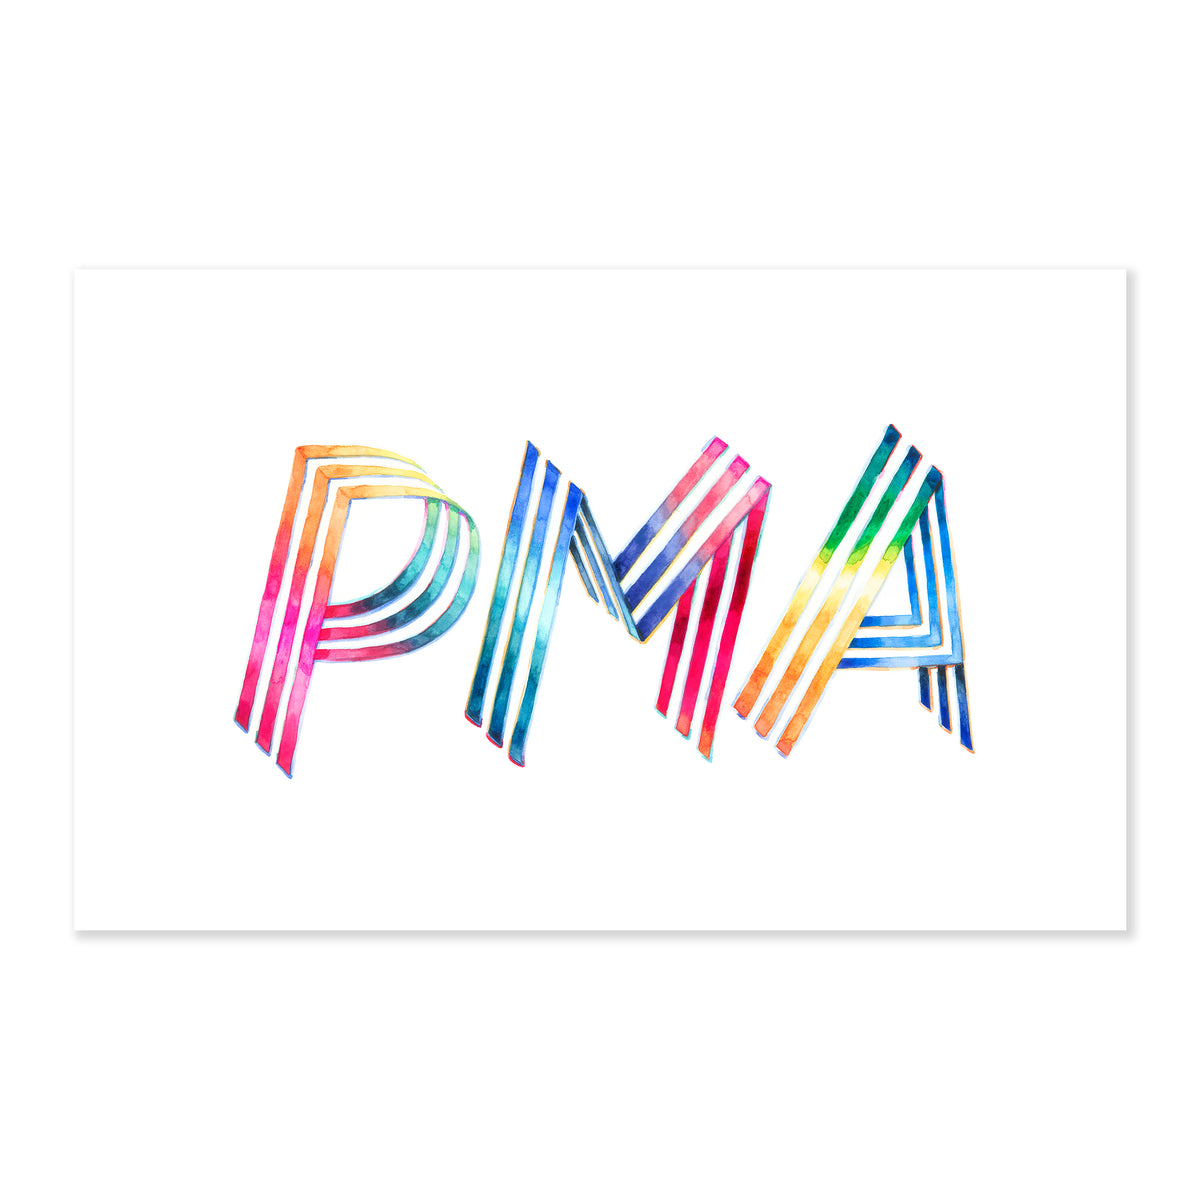 A fine art print illustrating the letters PMA in vibrant hues featuring pinks oranges yellows greens blues and reds painted using watercolors on a soft white background